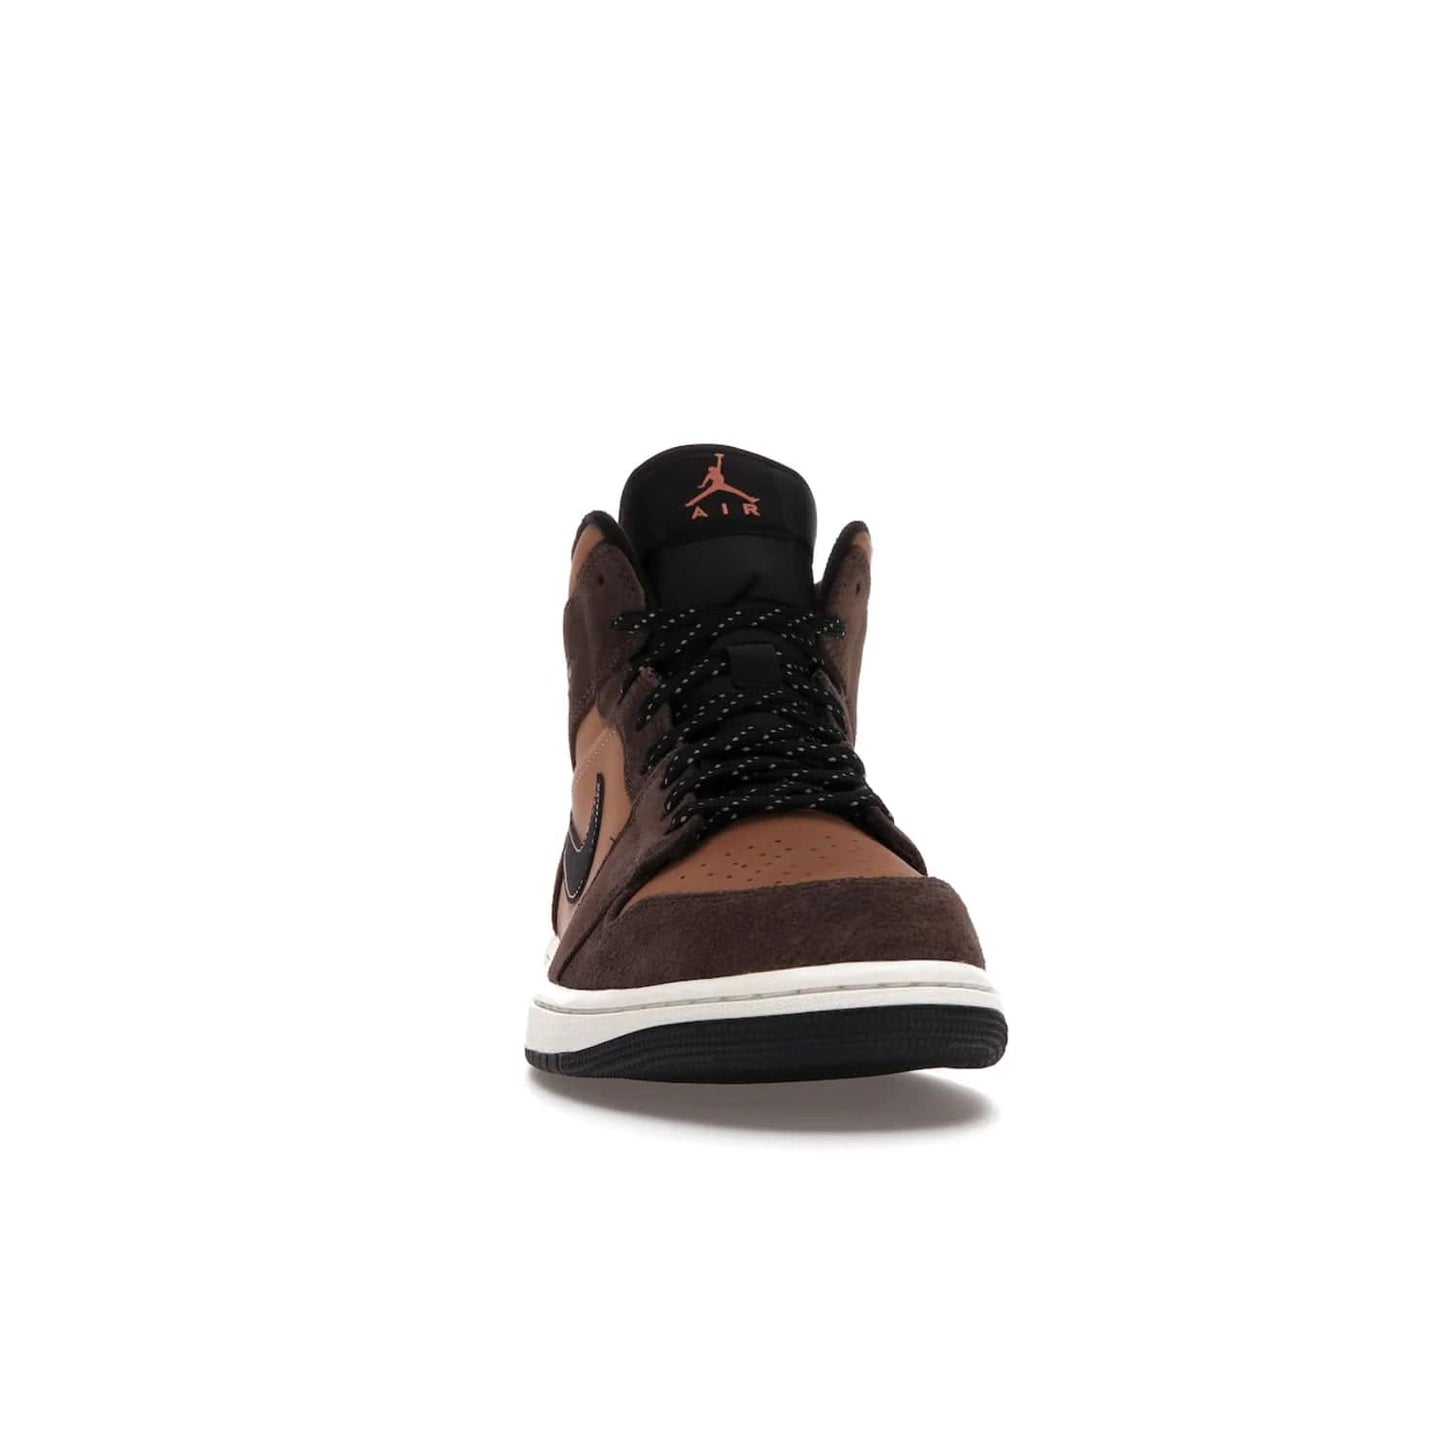 Jordan 1 Mid SE Dark Chocolate - Image 9 - Only at www.BallersClubKickz.com - This fashionable and functional Jordan 1 Mid SE Dark Chocolate features a light brown Durabuck upper, dark brown suede overlays, black Swoosh logos and reflective patch at heel. A must-have for any sneakerhead!